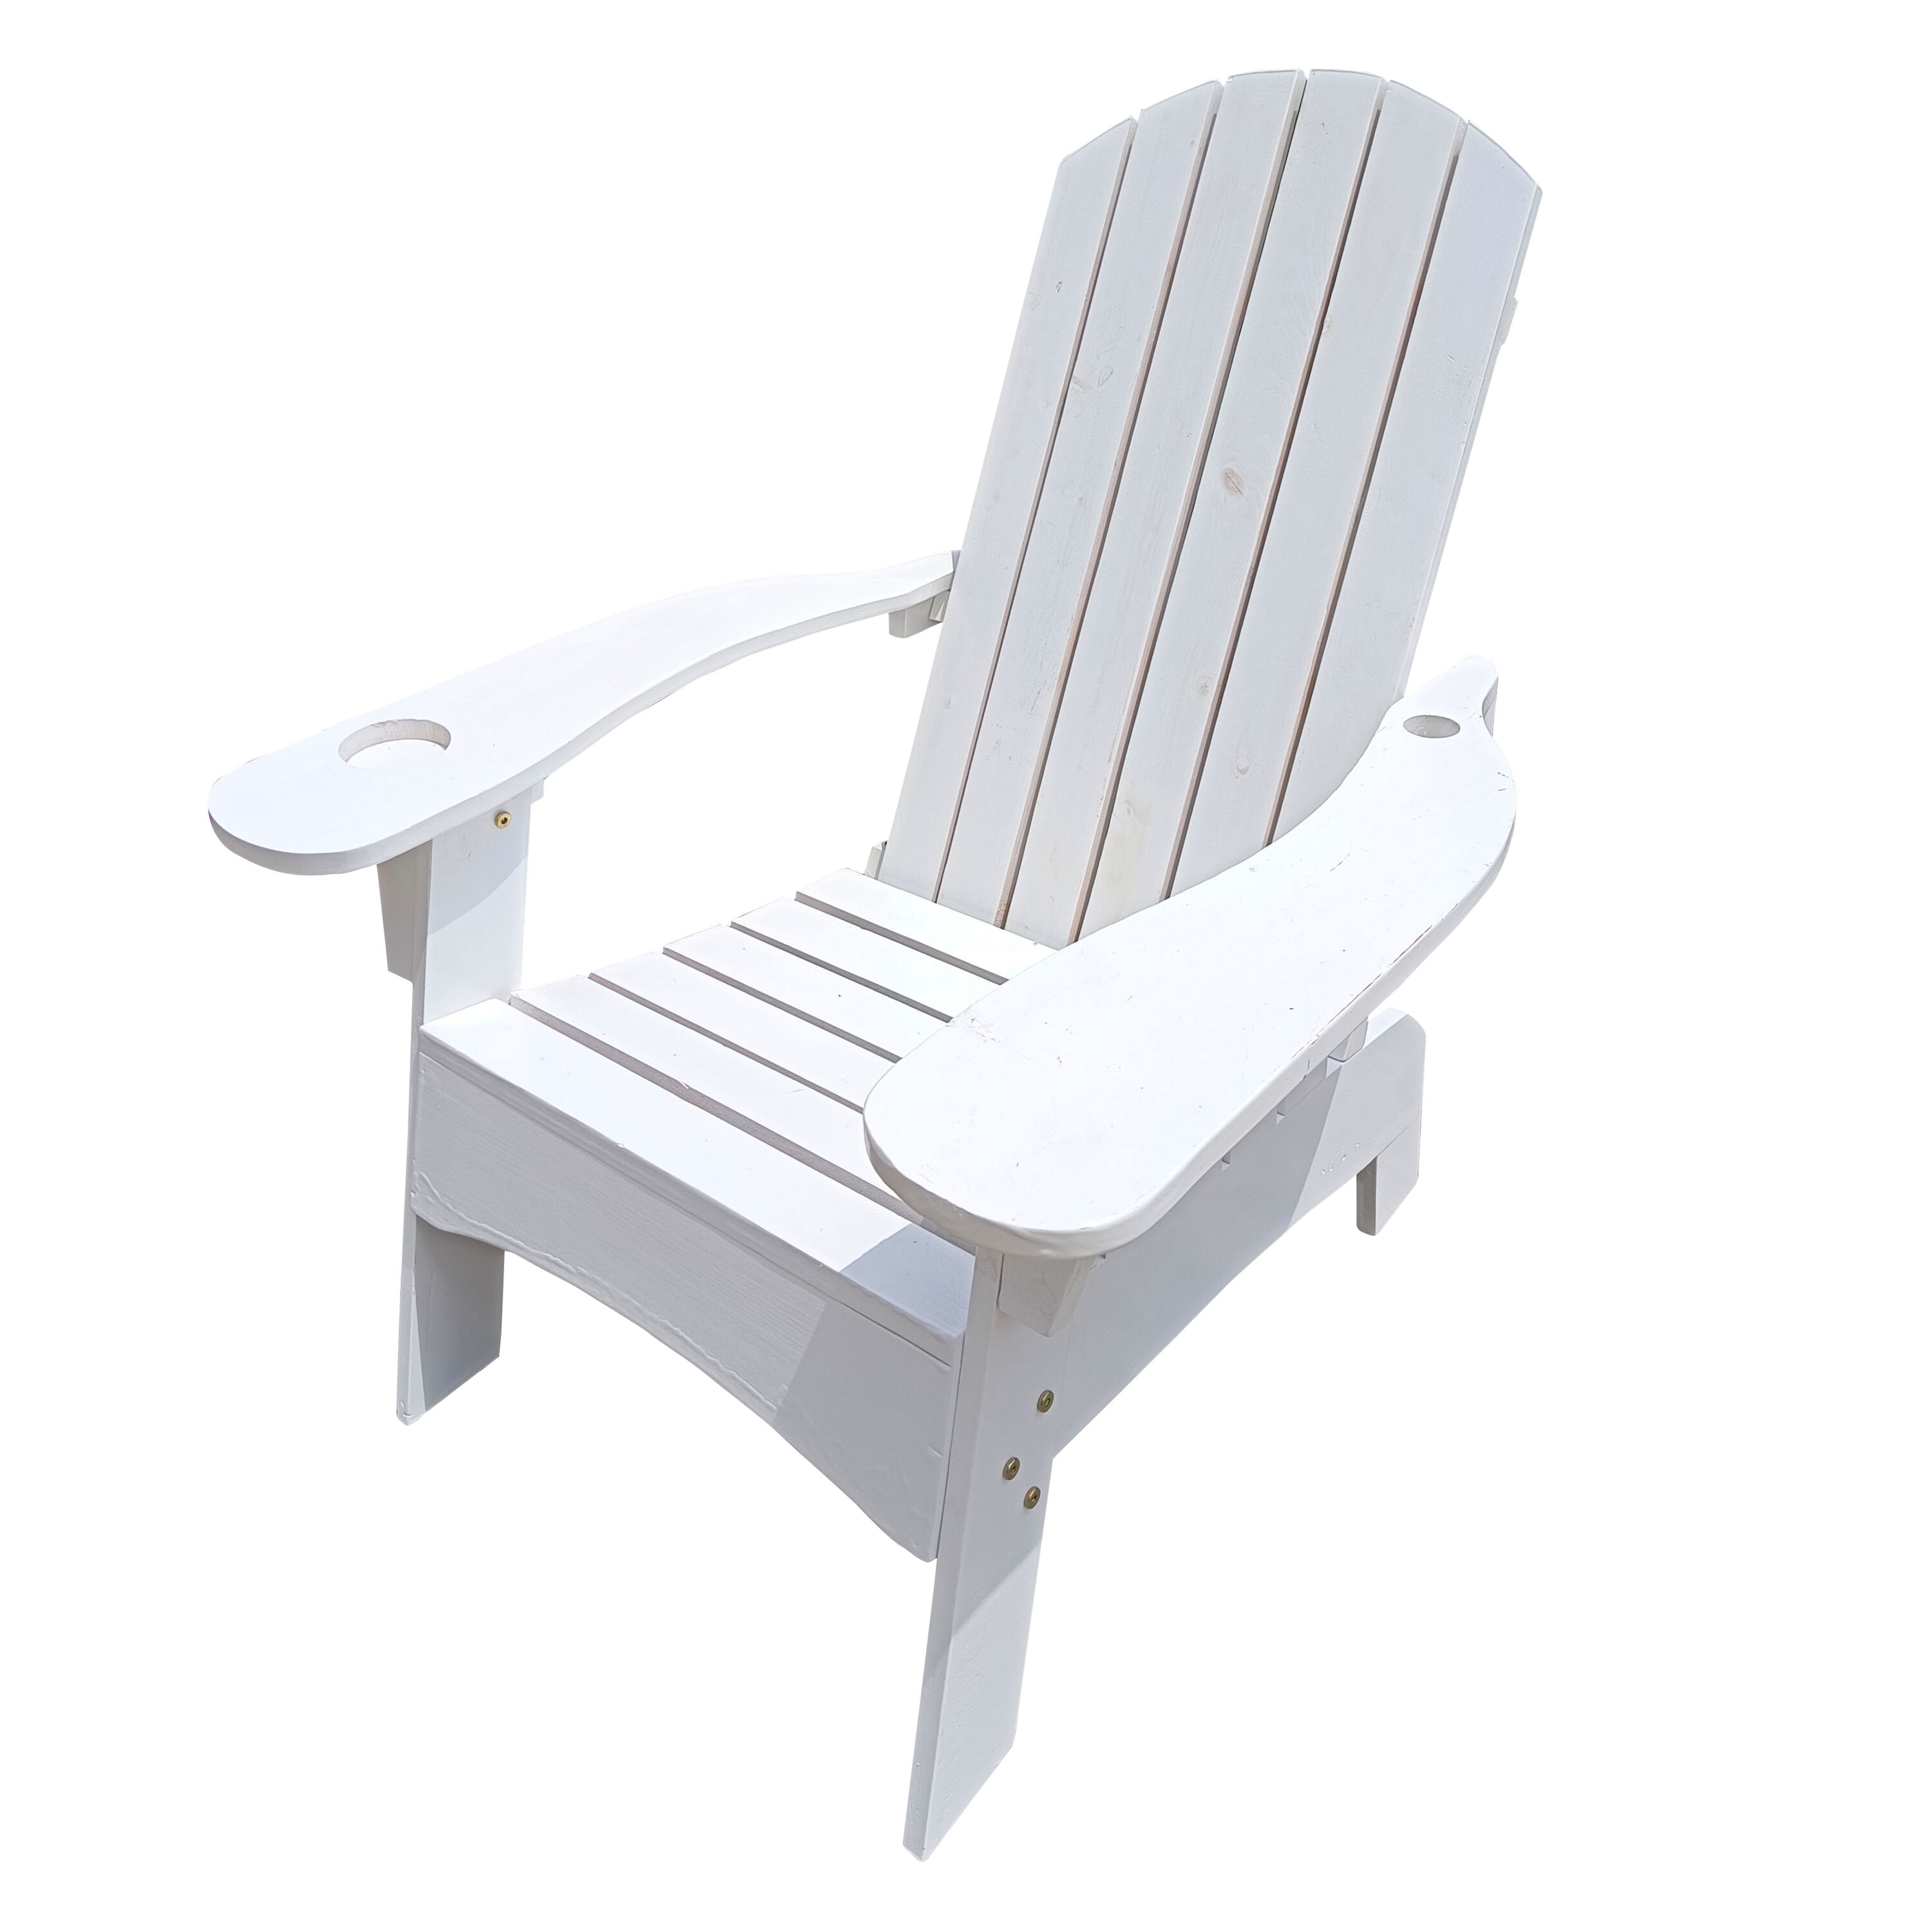 Flynama White Wood Frame Stationary Adirondack Chair with Solid Seat | LY-V-FX-OL3100-BBW